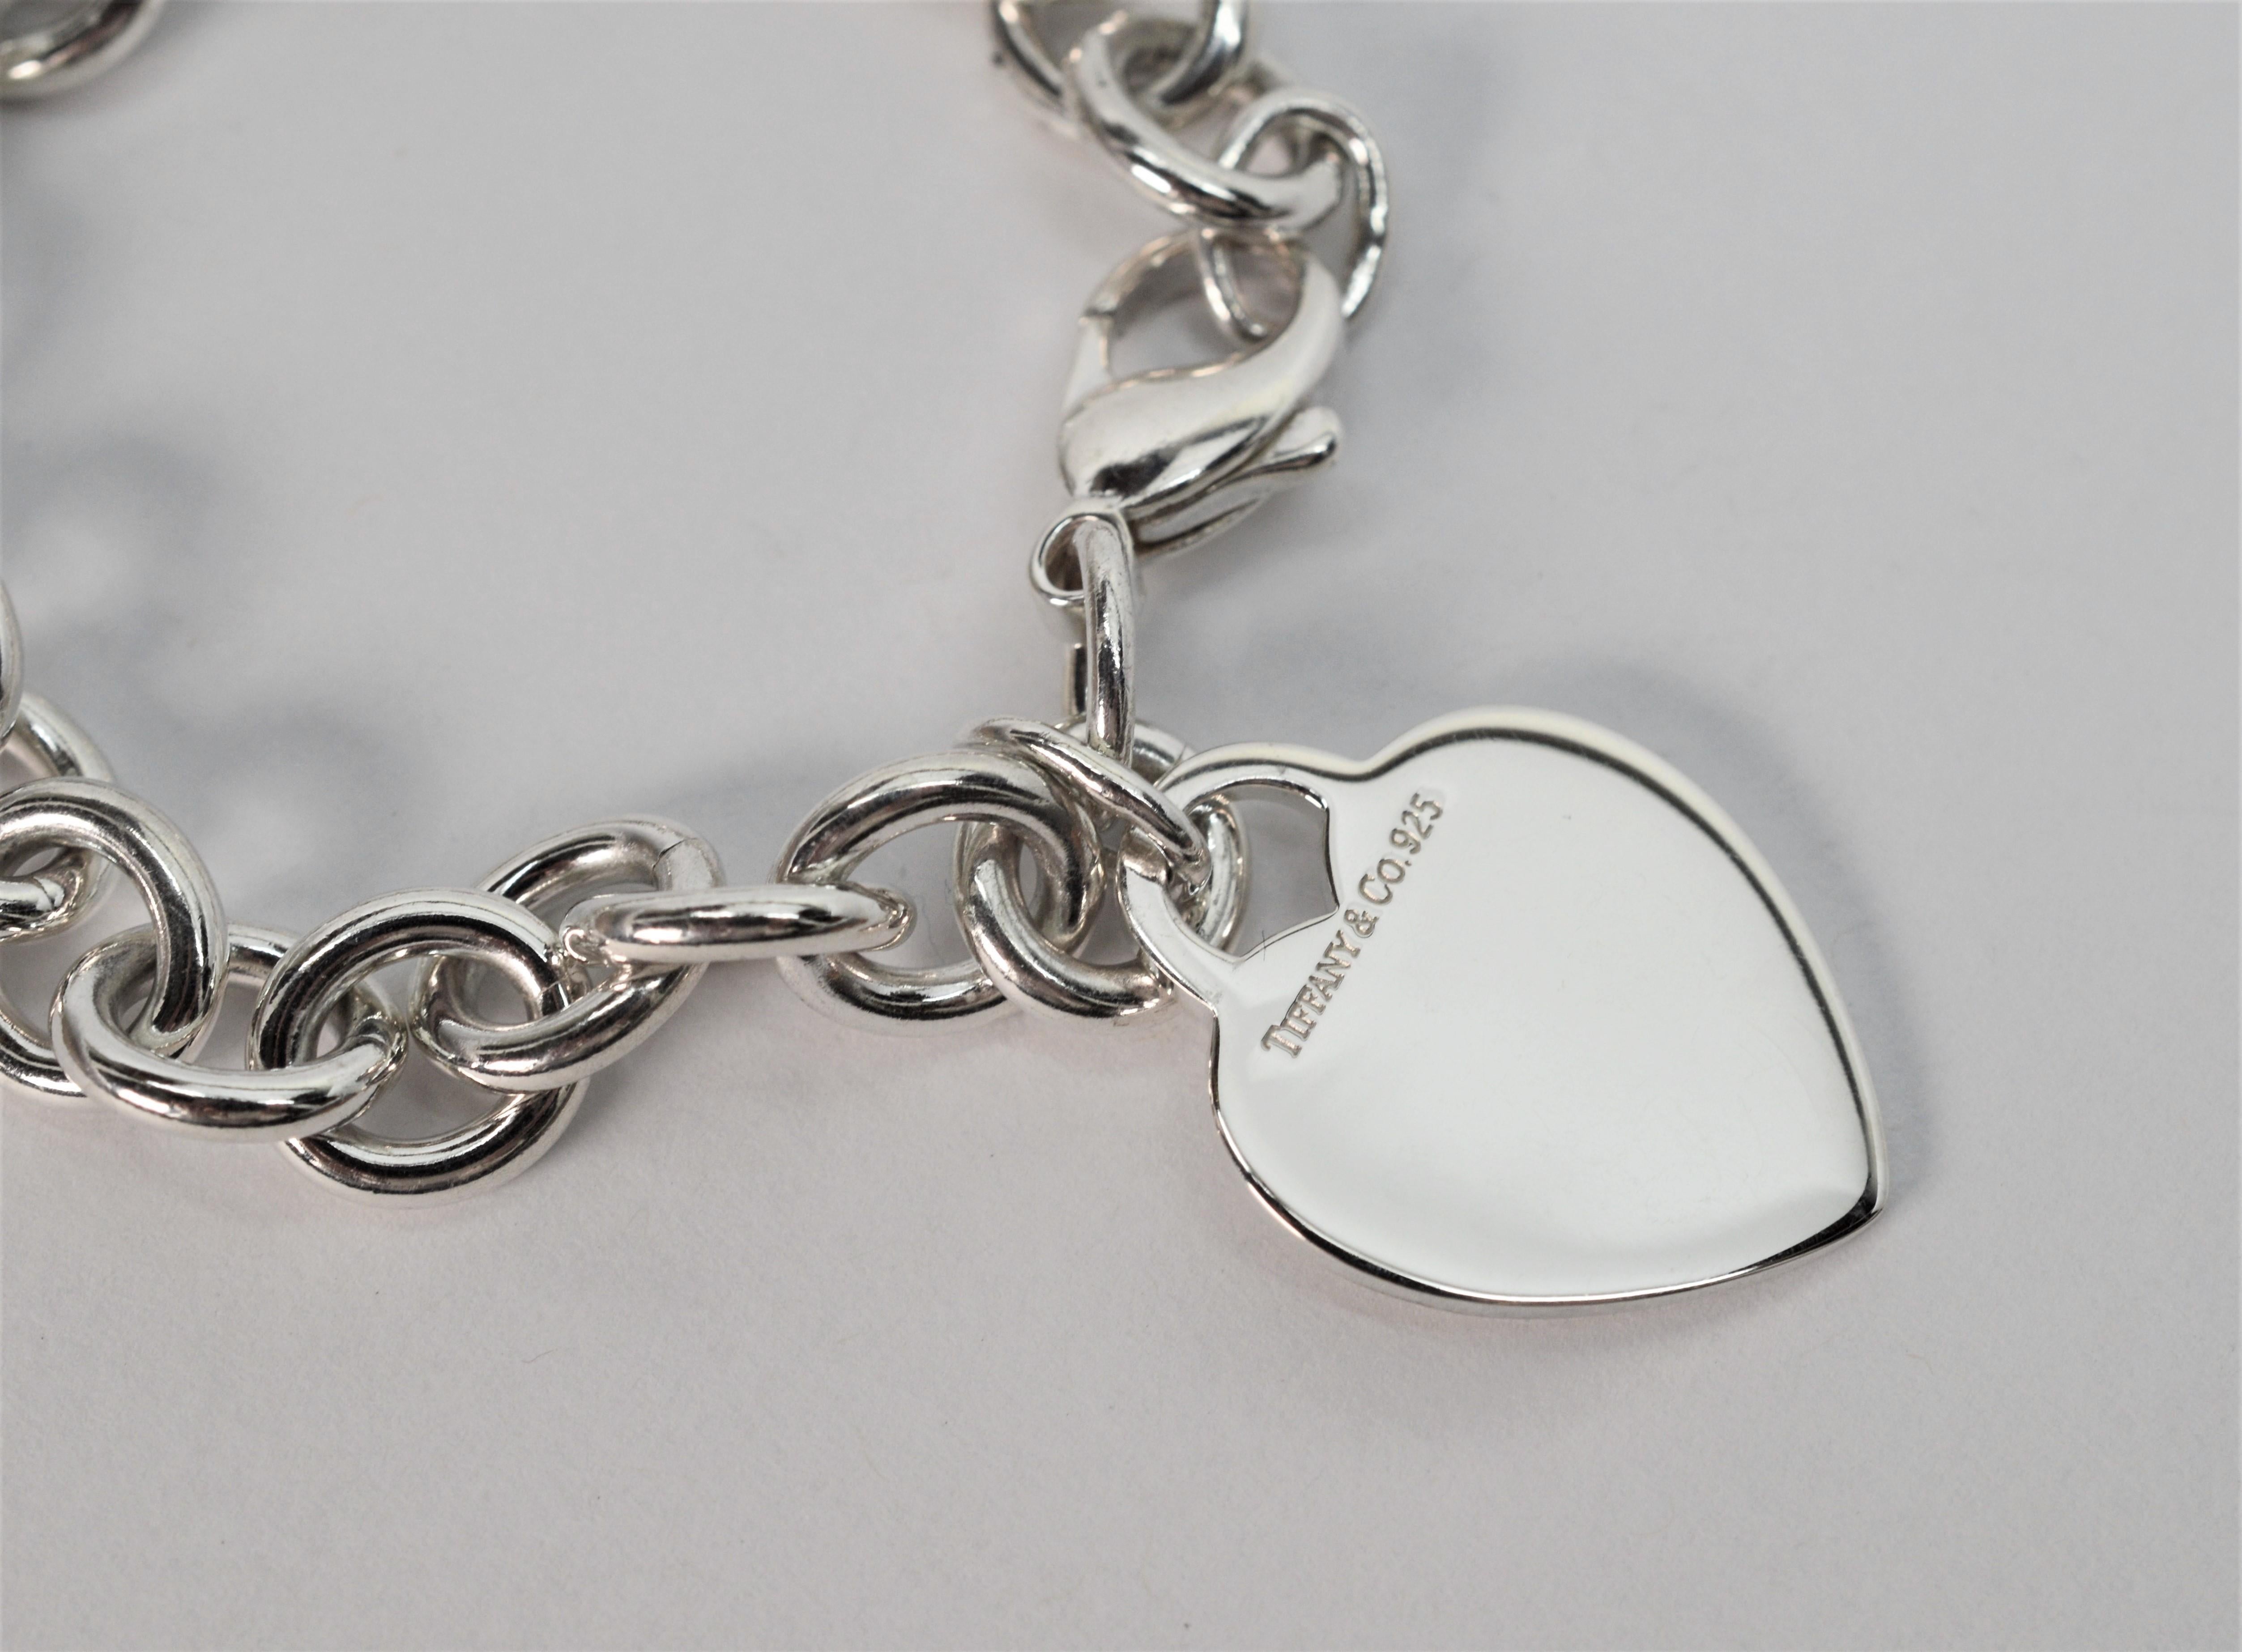 The heart tag charm collection was inspired by T & Co.'s key ring collection first introduced by in 1969. This wildly popular .925 sterling silver charm bracelet has generous chain links approximately 10.8 mm width and the length of the piece is 7.5